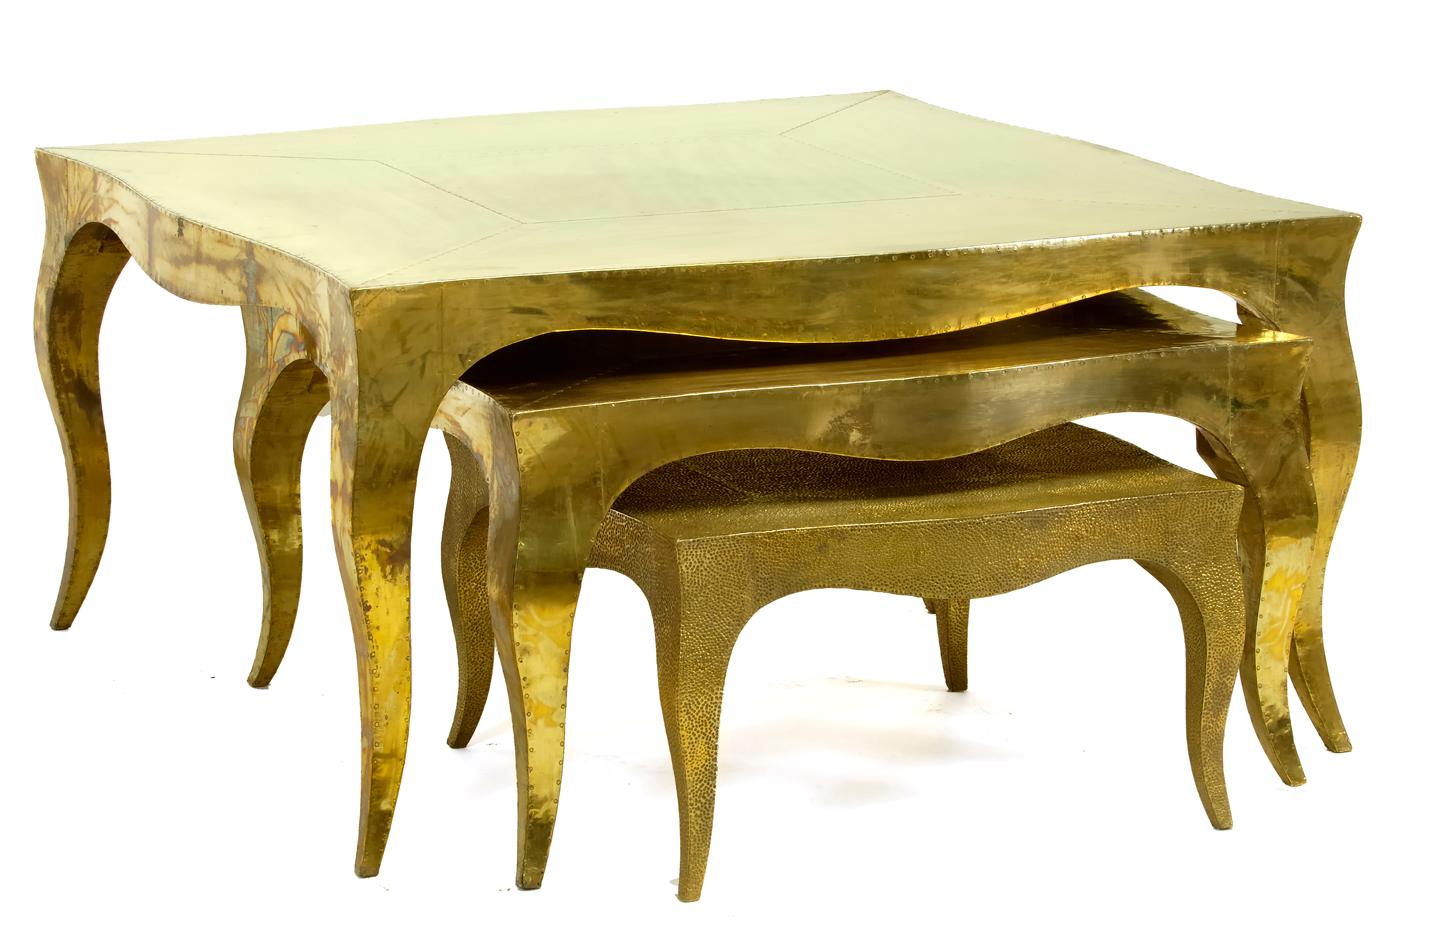 Louise Art Deco Industrial and Work Tables Mid. Hammered Brass 18.5x18.5x10 inch For Sale 5